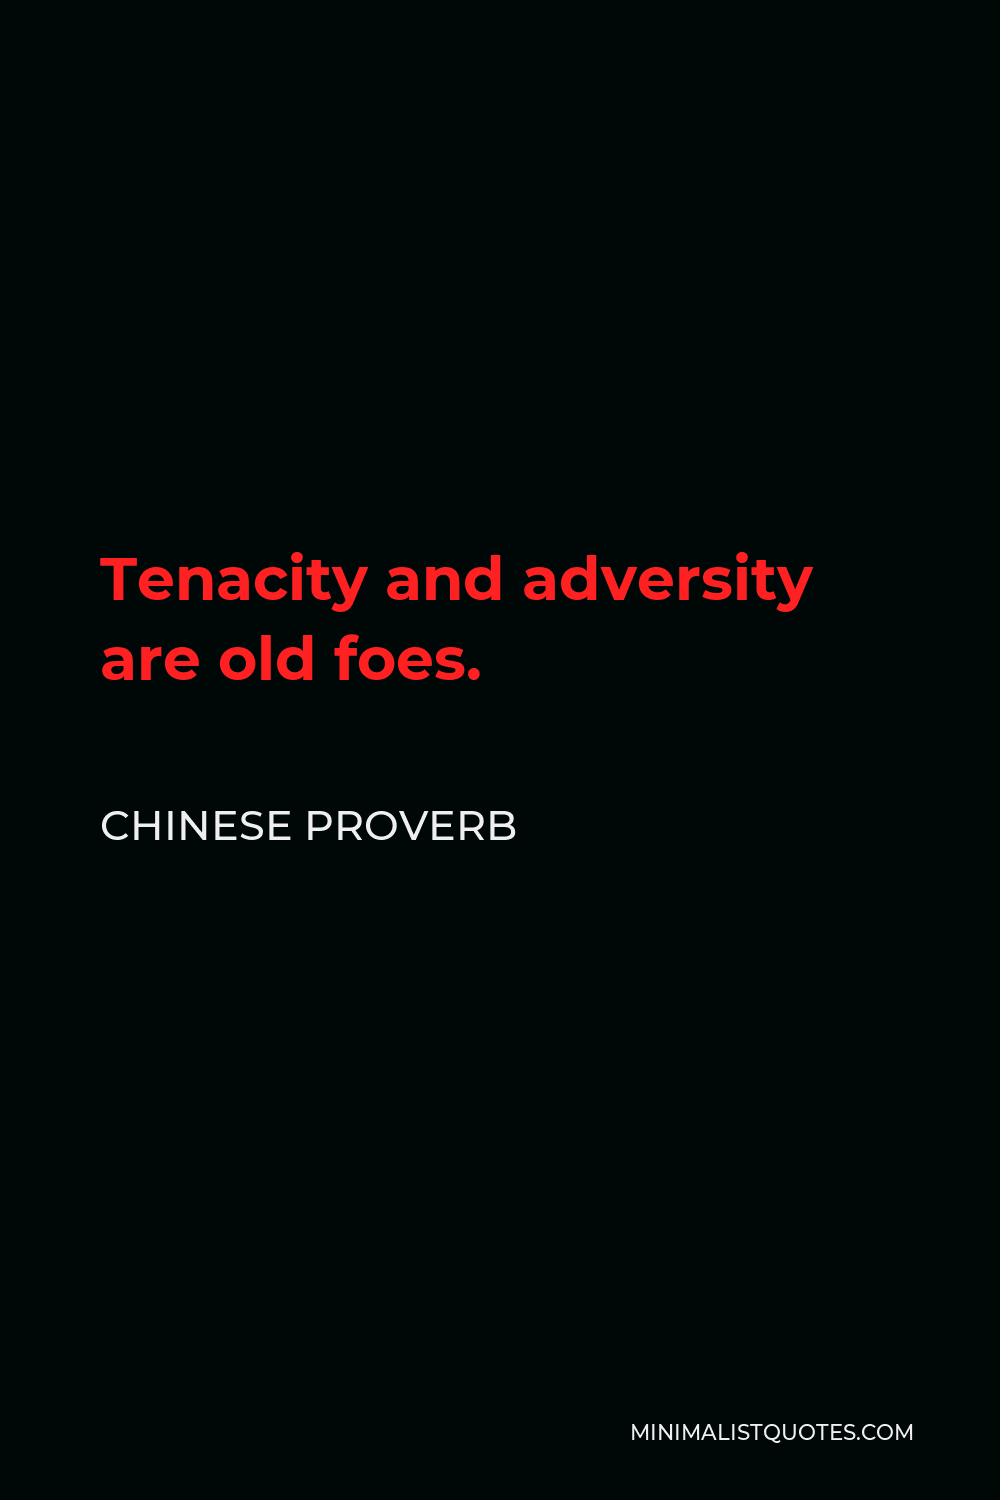 Chinese Proverb Quote - Tenacity and adversity are old foes.